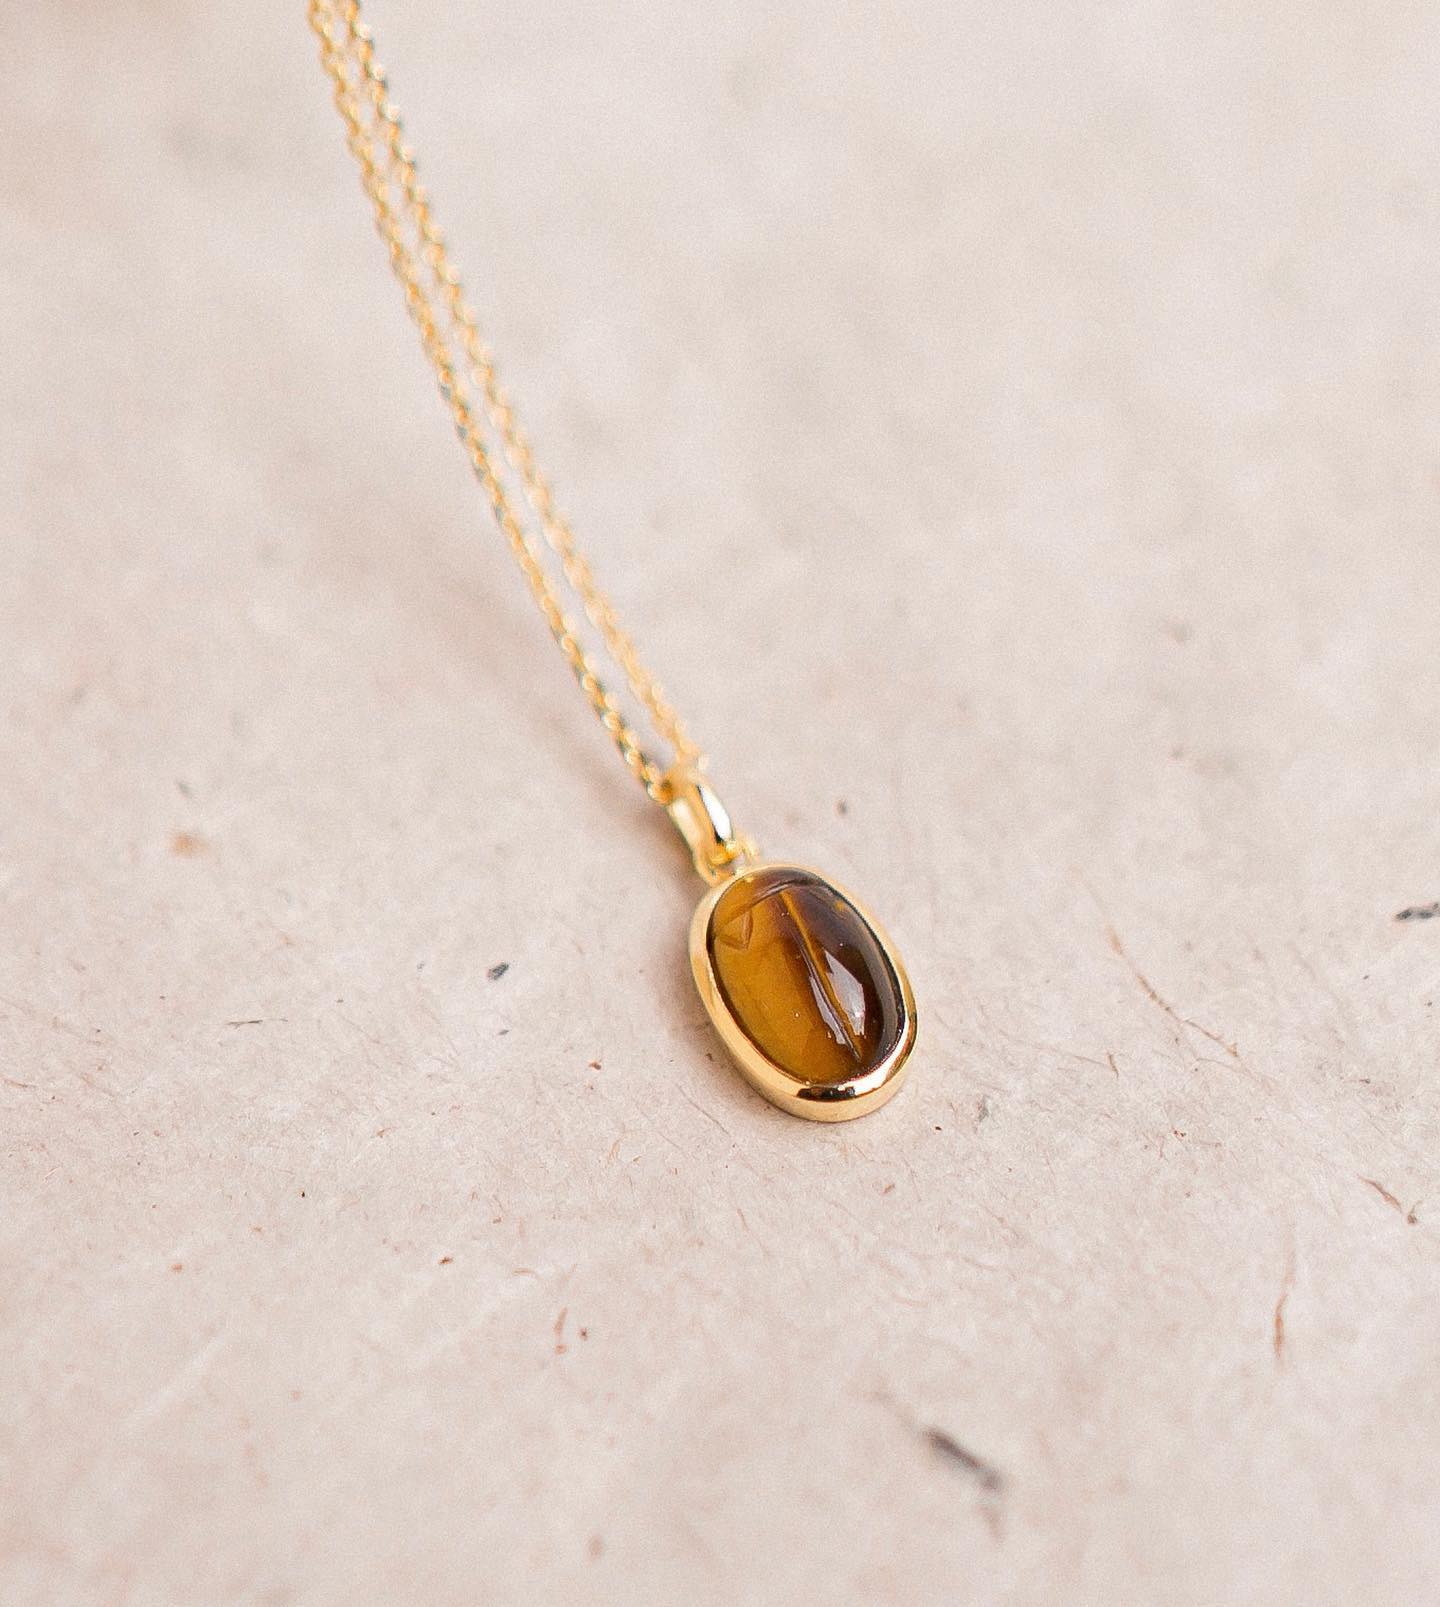 Missing in your Jewelry Box

Scarabée Collection in Gold Plated Silver - Tiger Eye #myritazia
.
.
.
.
.
.
#jewelryfashion #jewelryblogger #jewerly #jewels #trendyjewelry #jewelrylovers #handmadejewelry #jewelrylover #jewelrydesigner